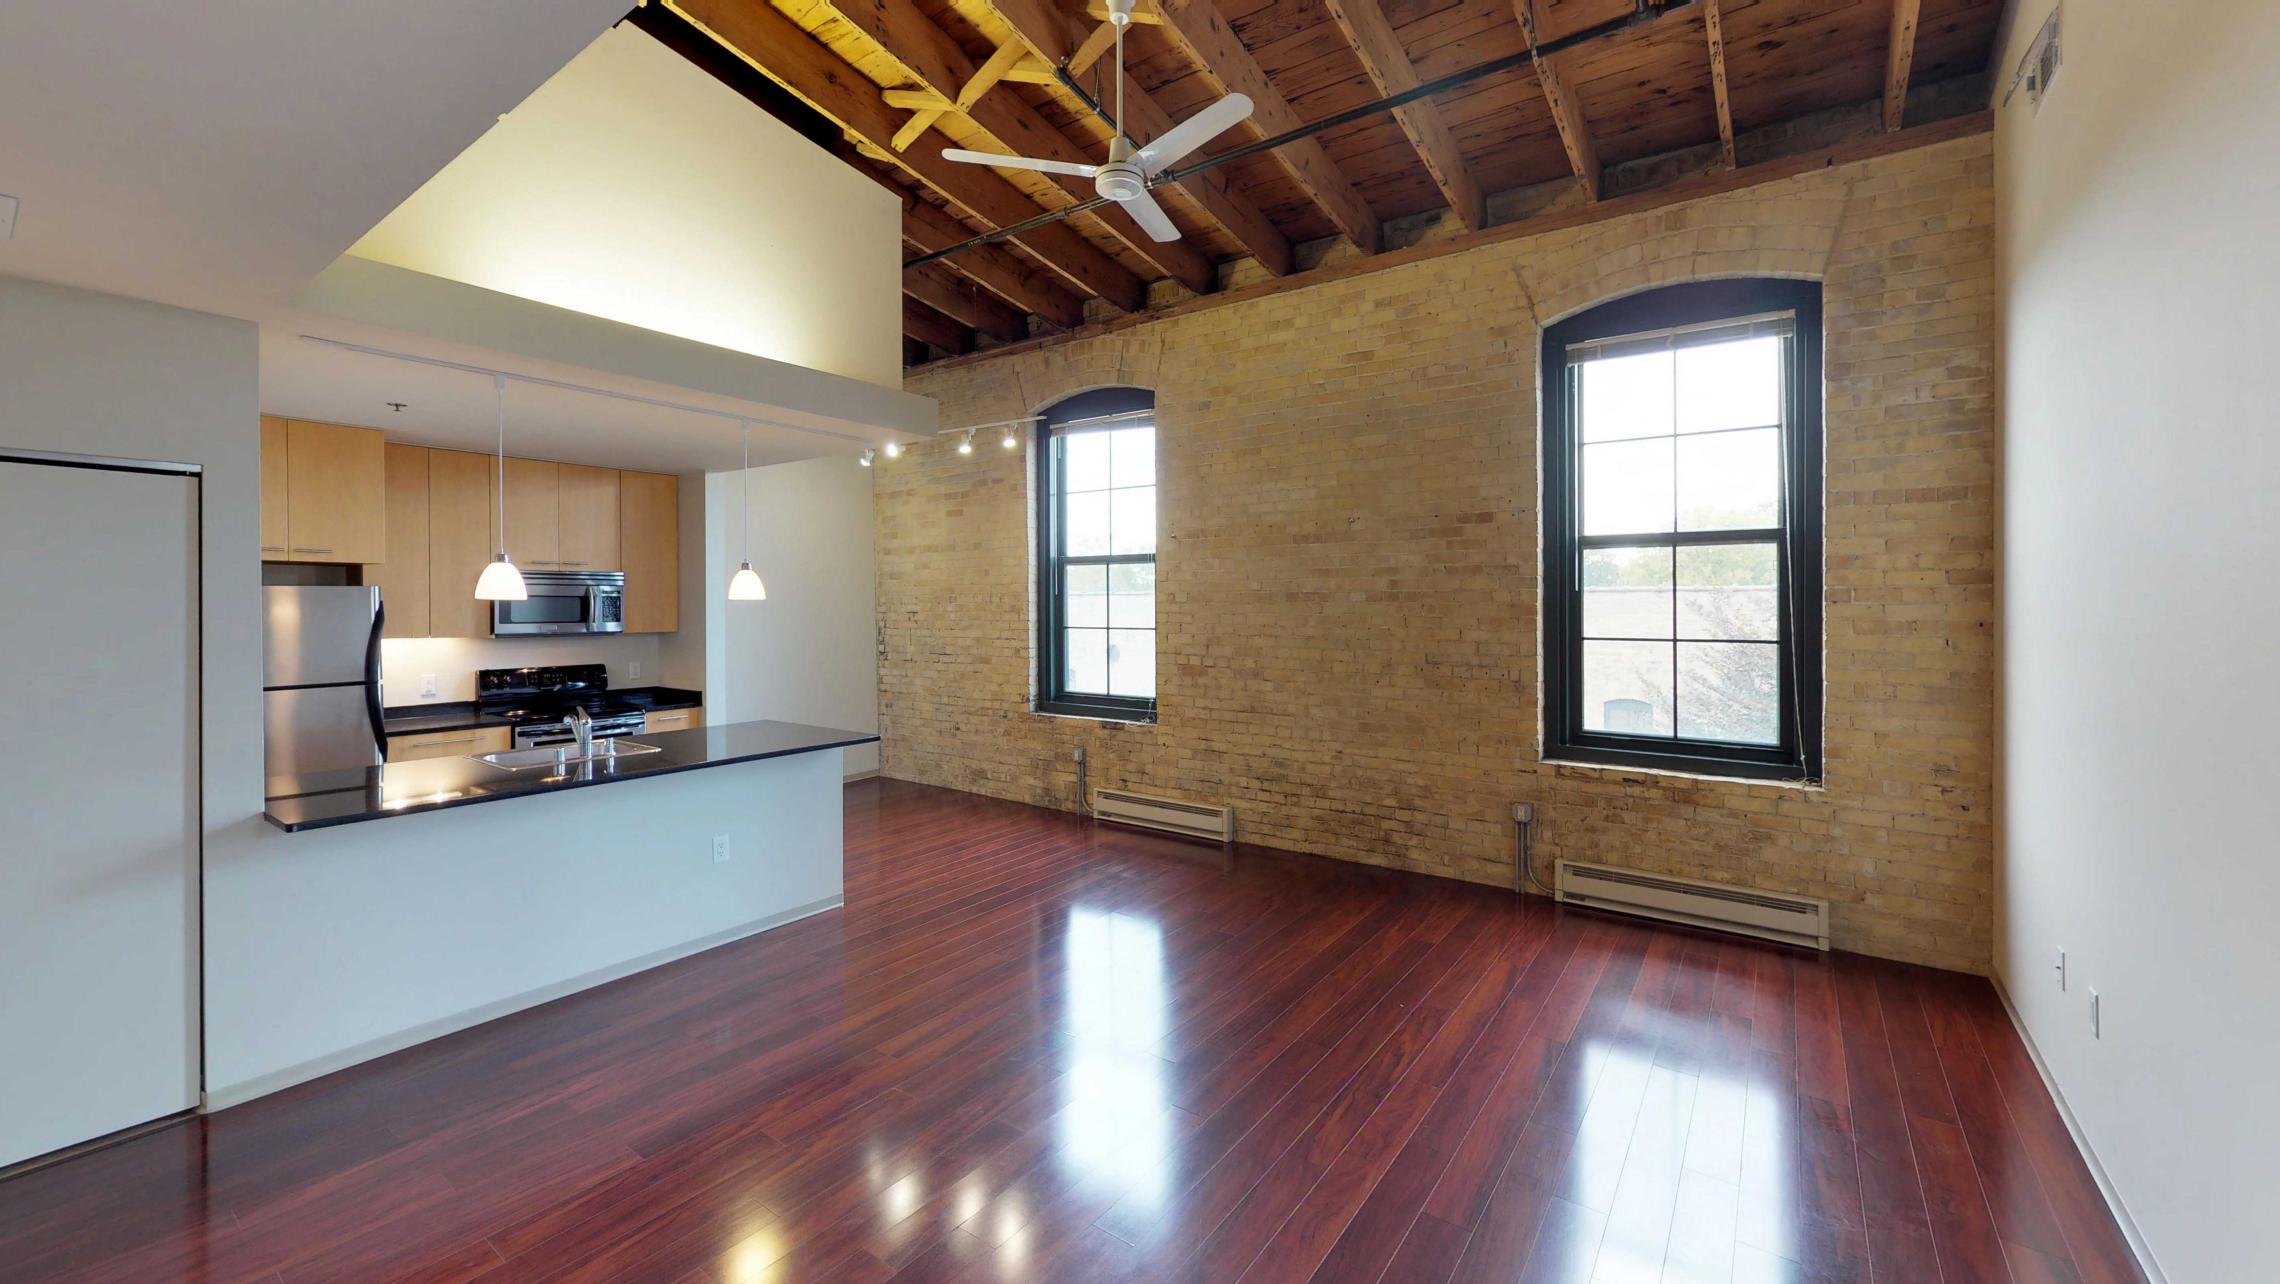 Tobacco-Lofts-Apartment-E312-Historic-Downtown-Two-Bedroom-Madison-Exposures-Brick-Vaulted-Ceiling-Yards.jpg